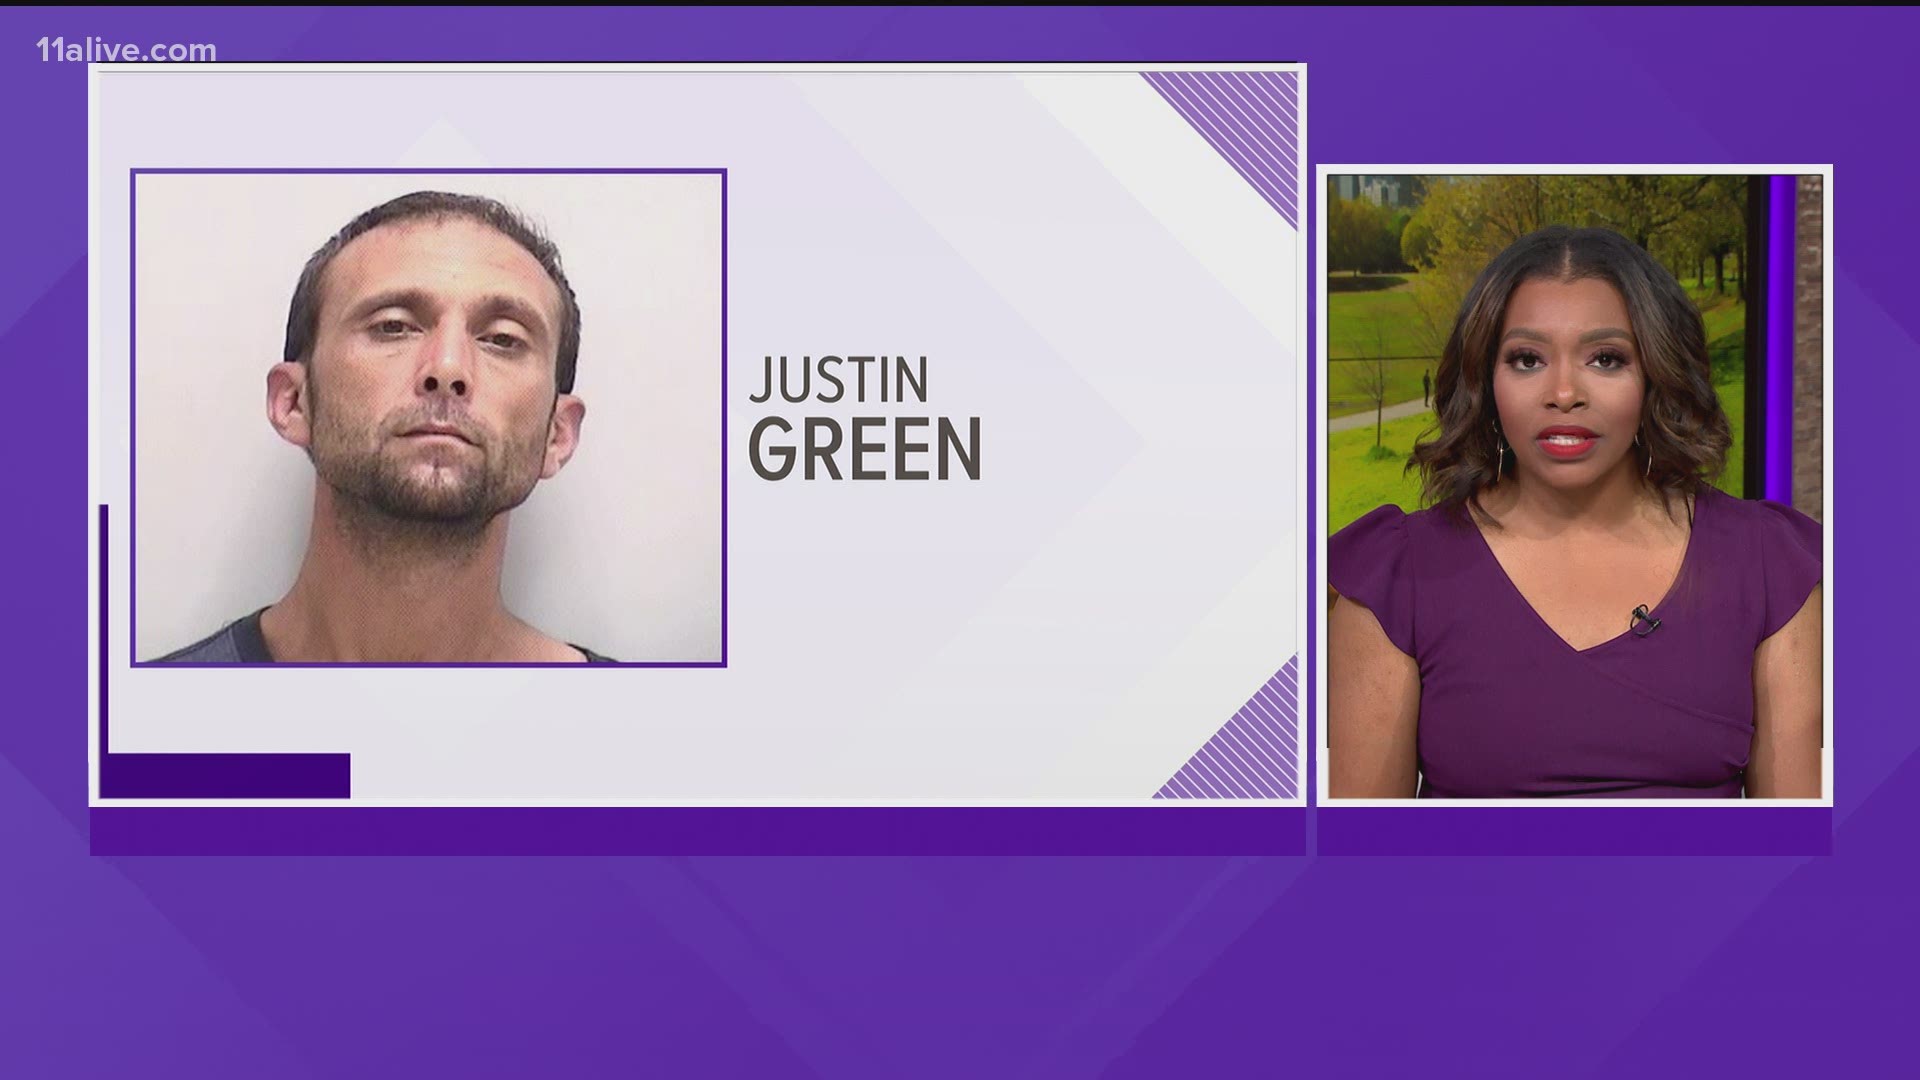 Officials said if you see Justin Ray Green, he is considered "armed and dangerous." They said to call 911 immediately and not to approach him.